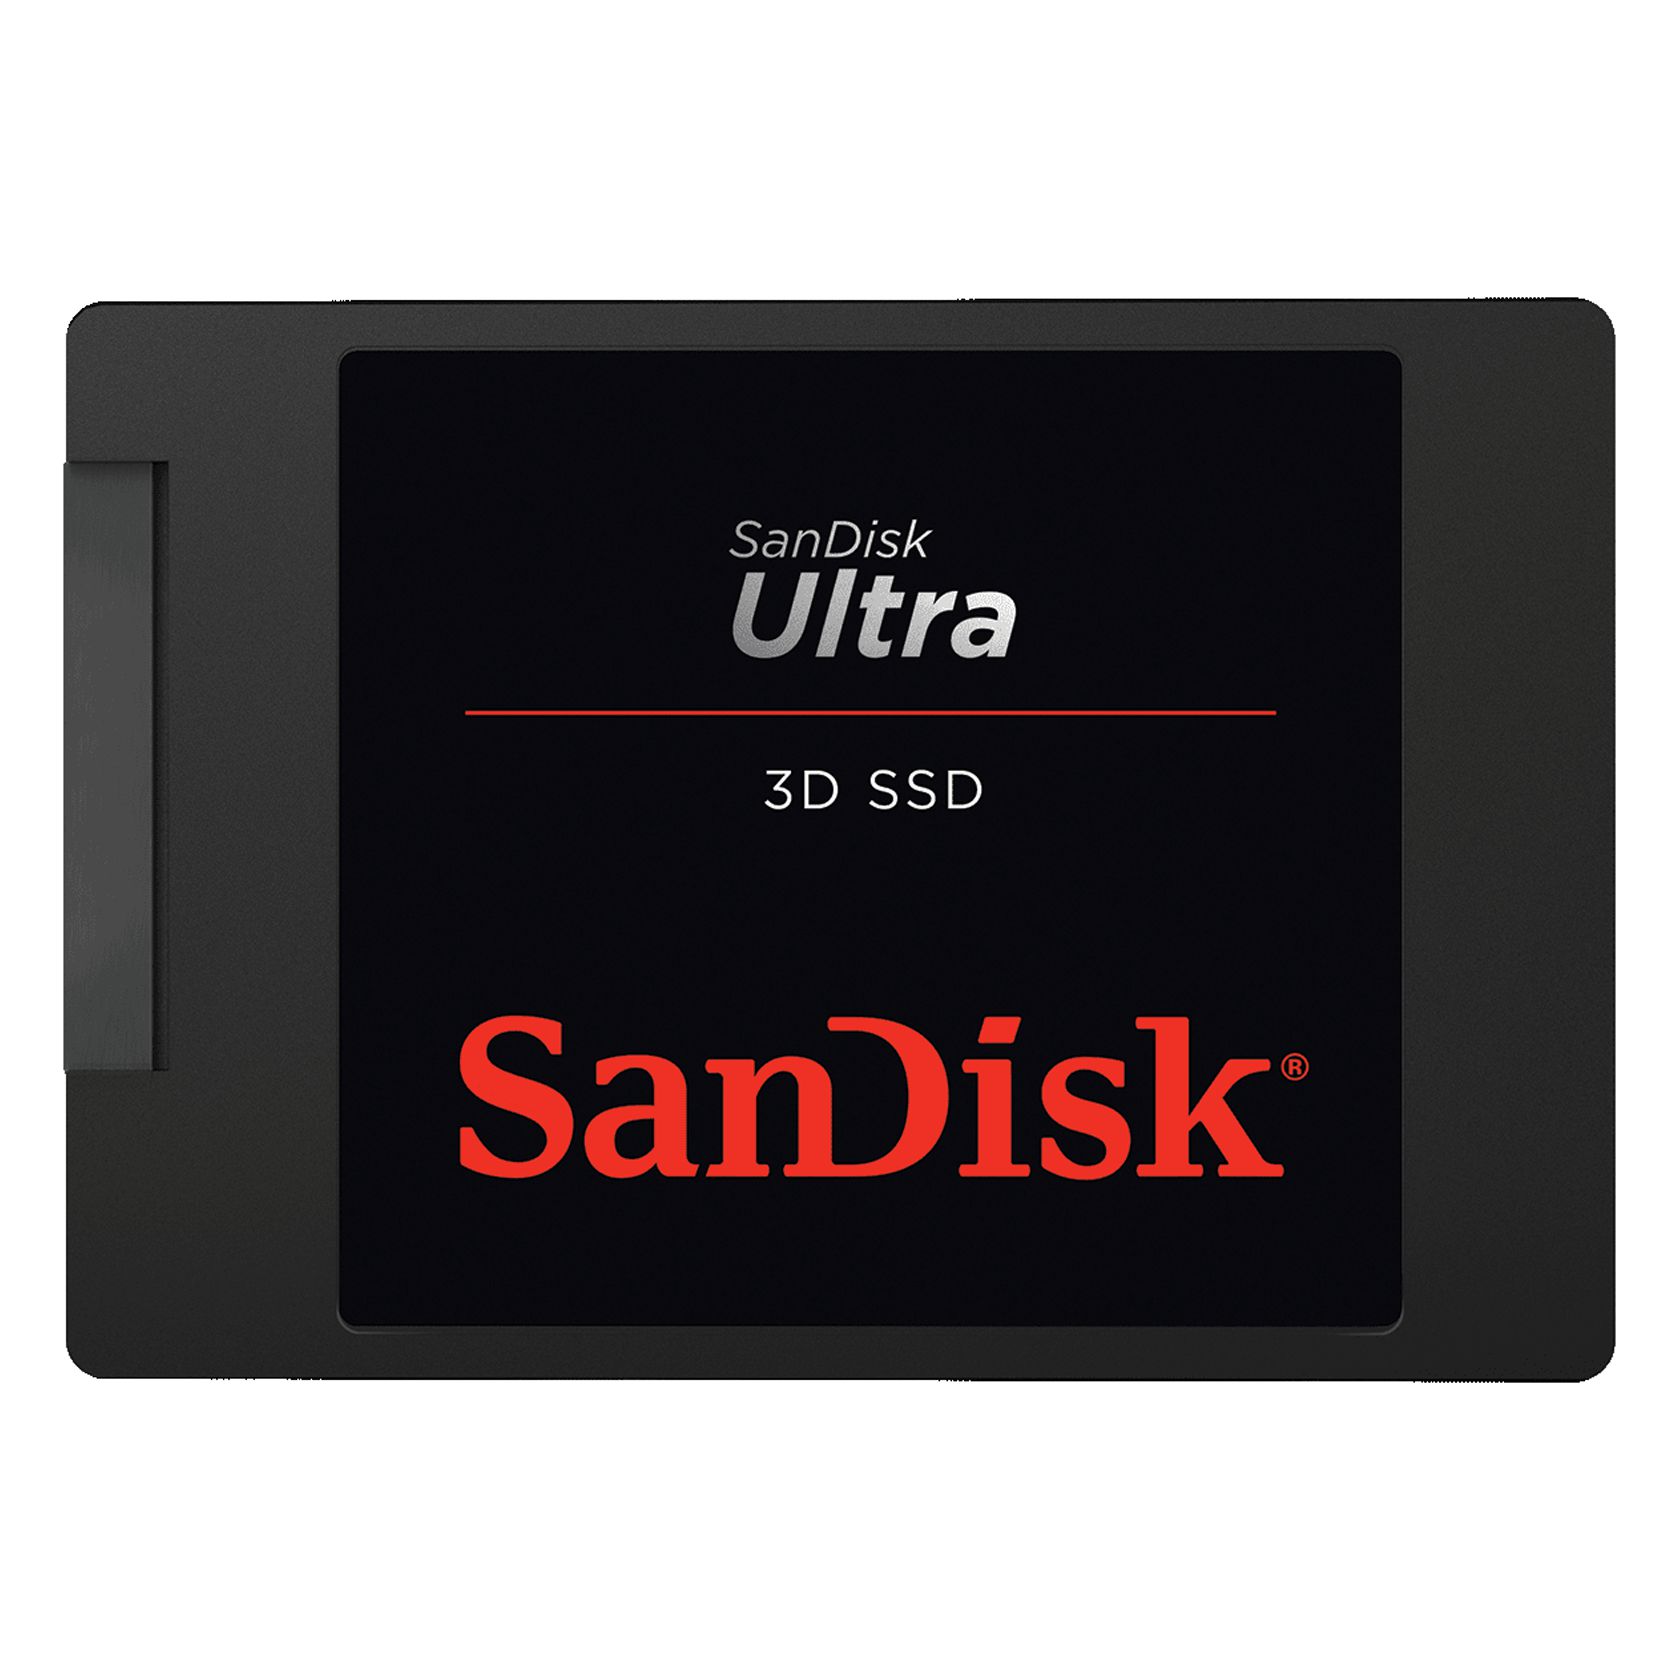 SanDisk 500GB Ultra 3D NAND SSD, Internal Solid State Drive - SDSSDH3-500G-G25 - image 2 of 5